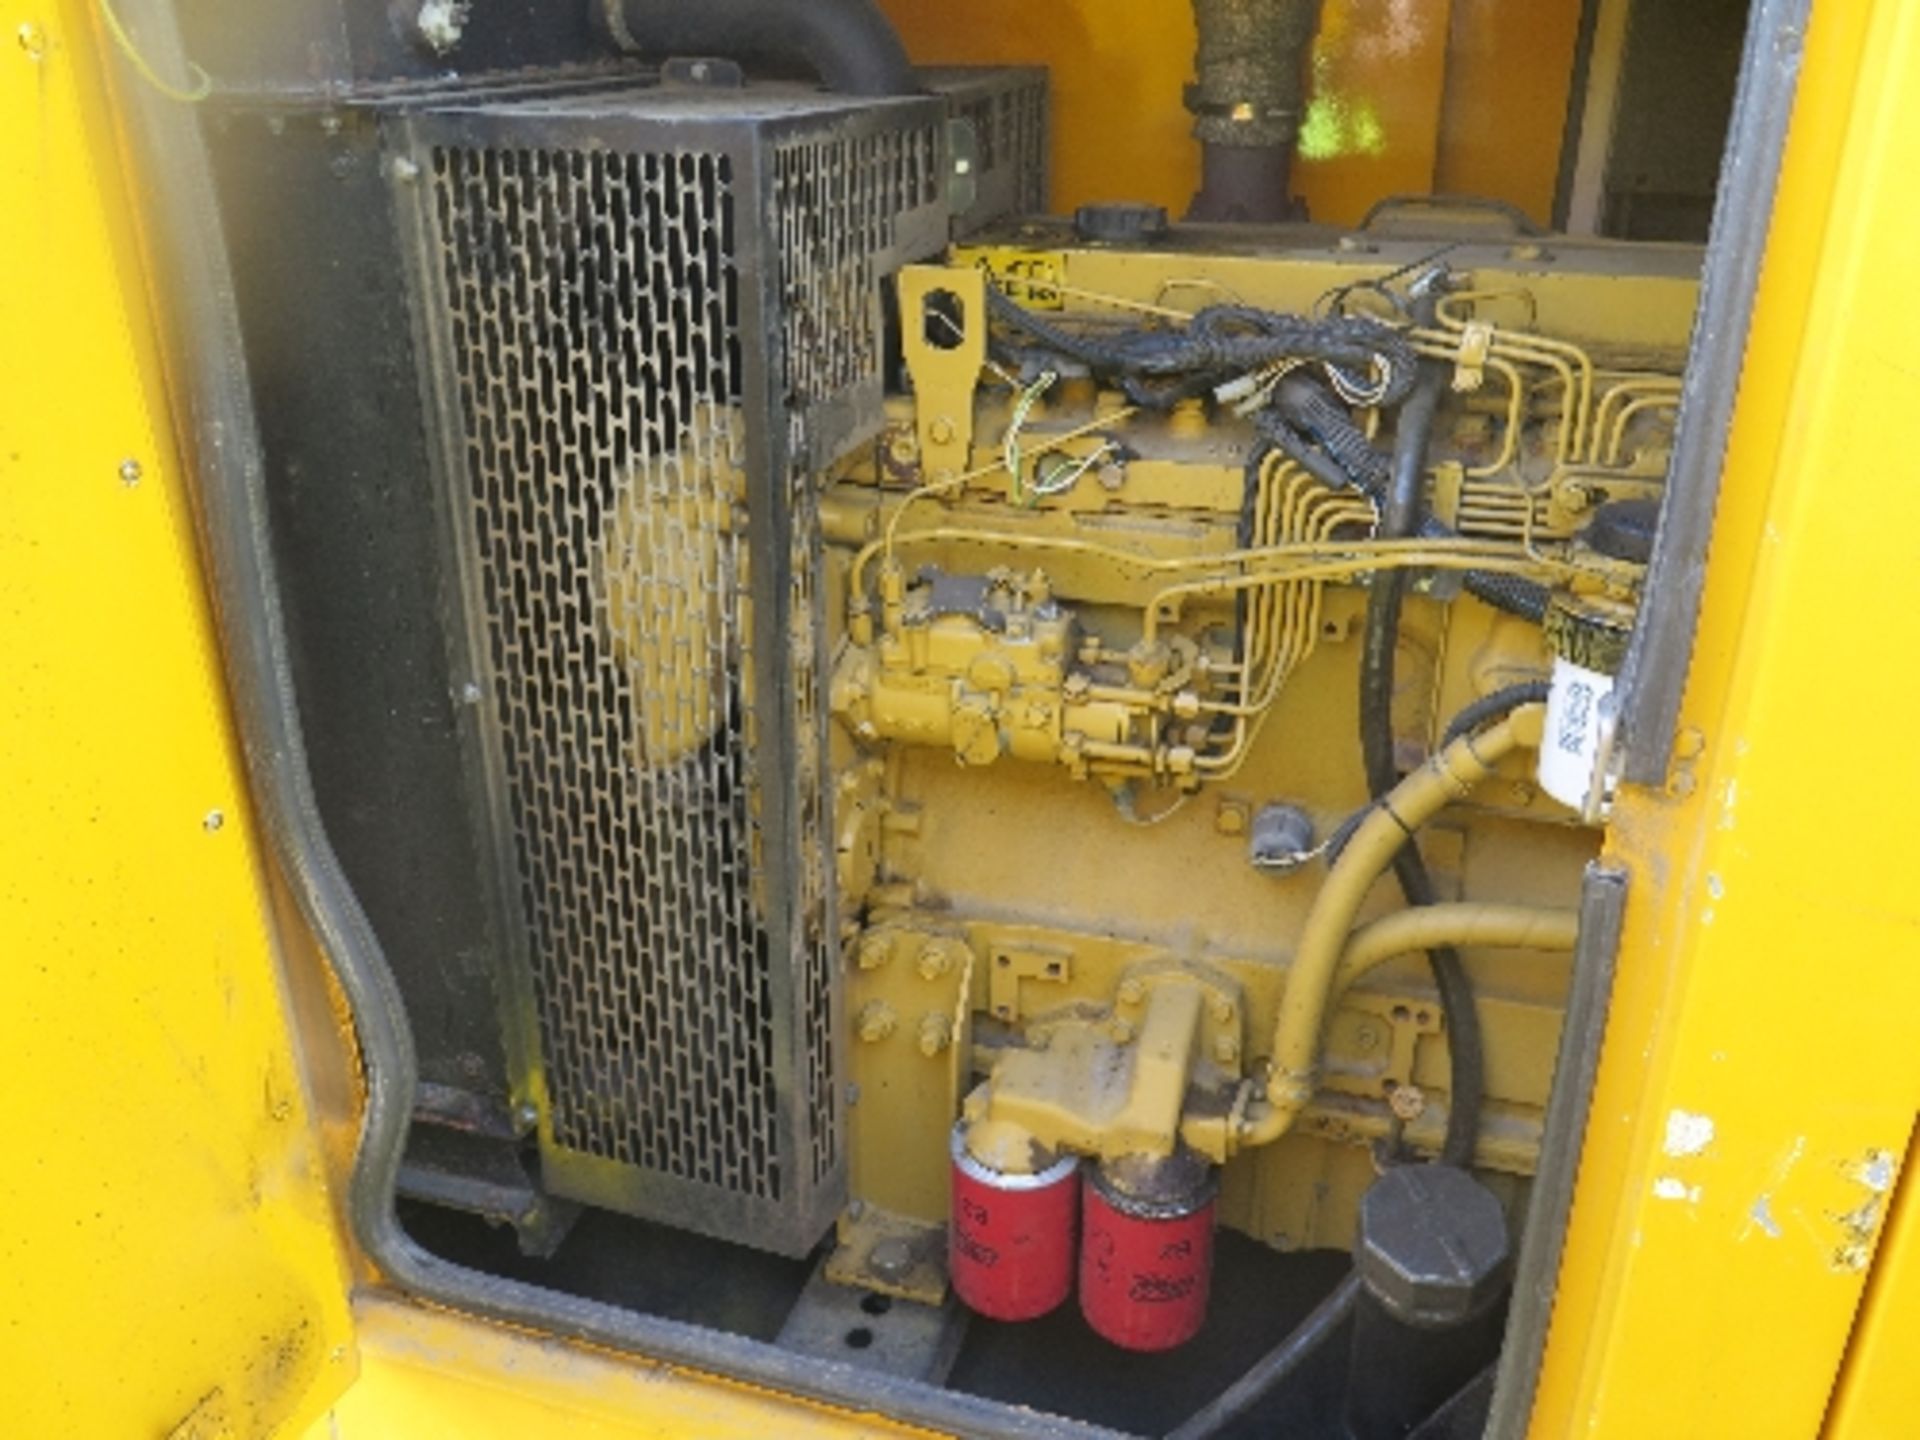 Caterpillar XQE100 generator 18121 hrs 138848
PERKINS - RUNS AND MAKES POWER
ALL LOTS are SOLD - Image 3 of 7